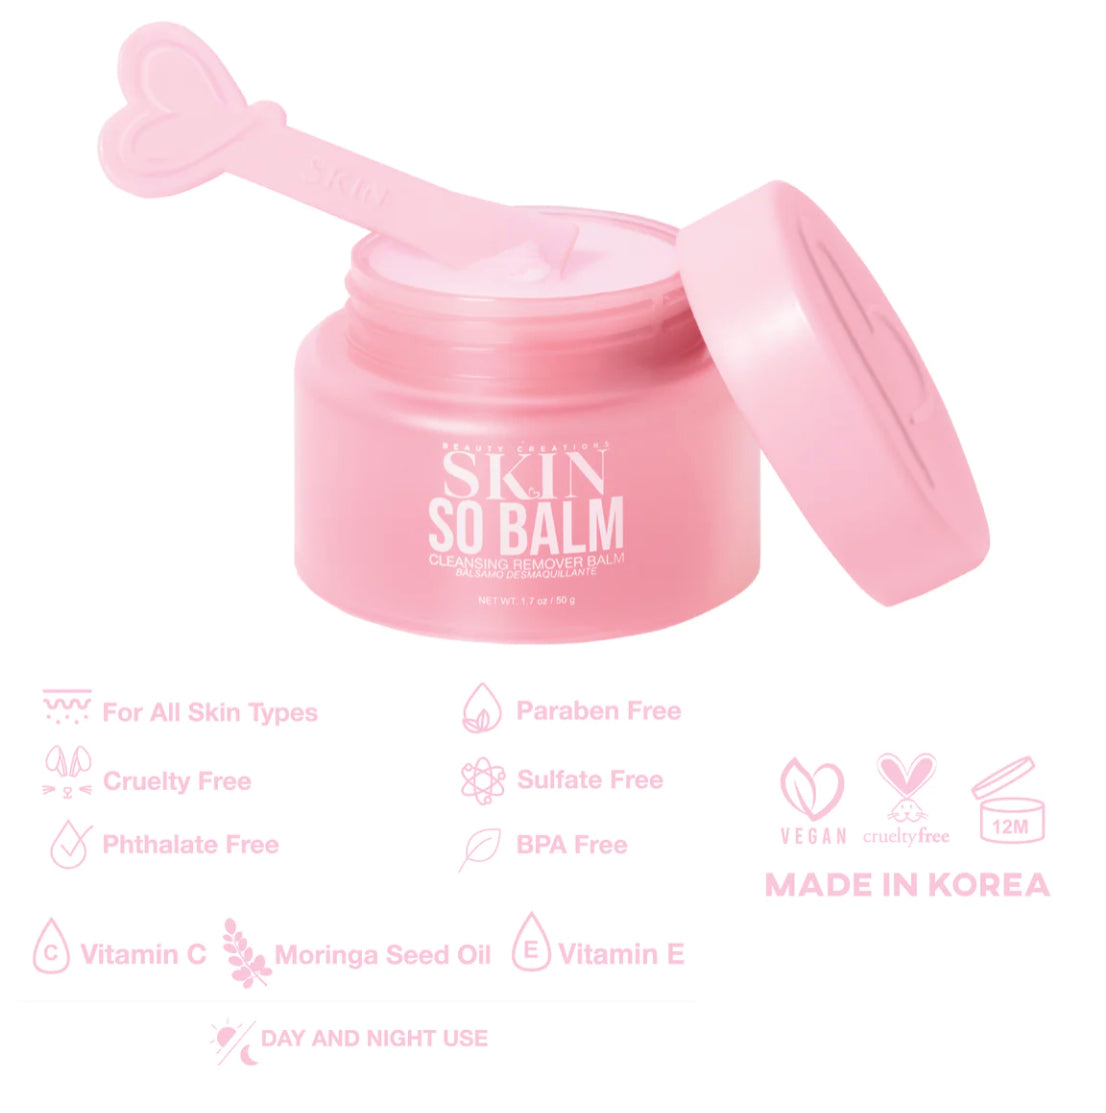 Beauty Creations “ So Balm” Cleansing balm